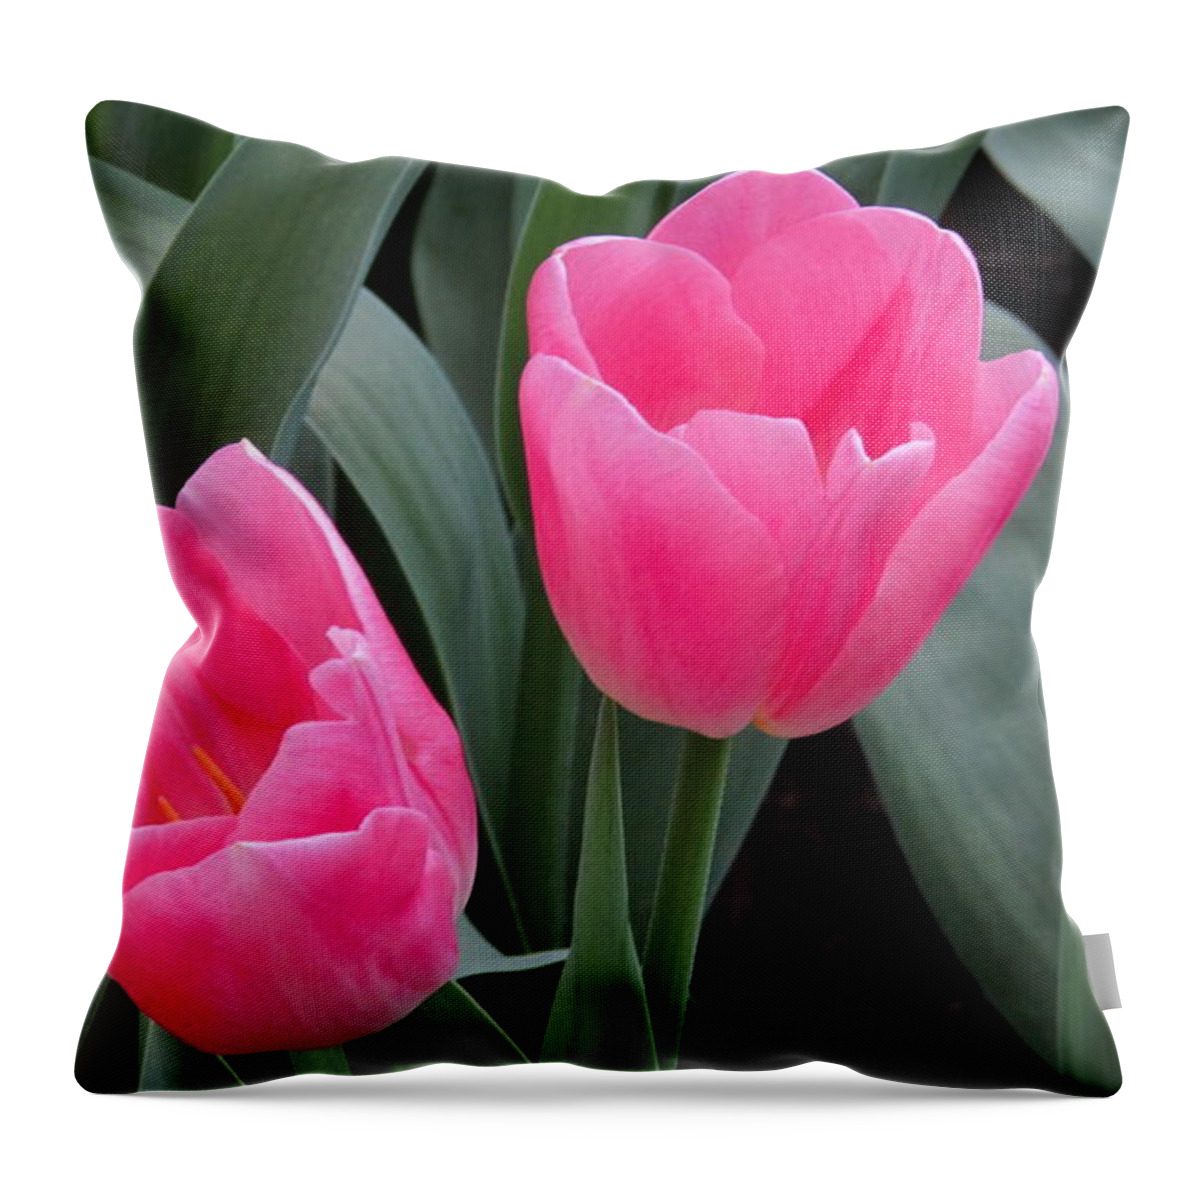 Orchid Throw Pillow featuring the photograph Tulip by Cesar Vieira